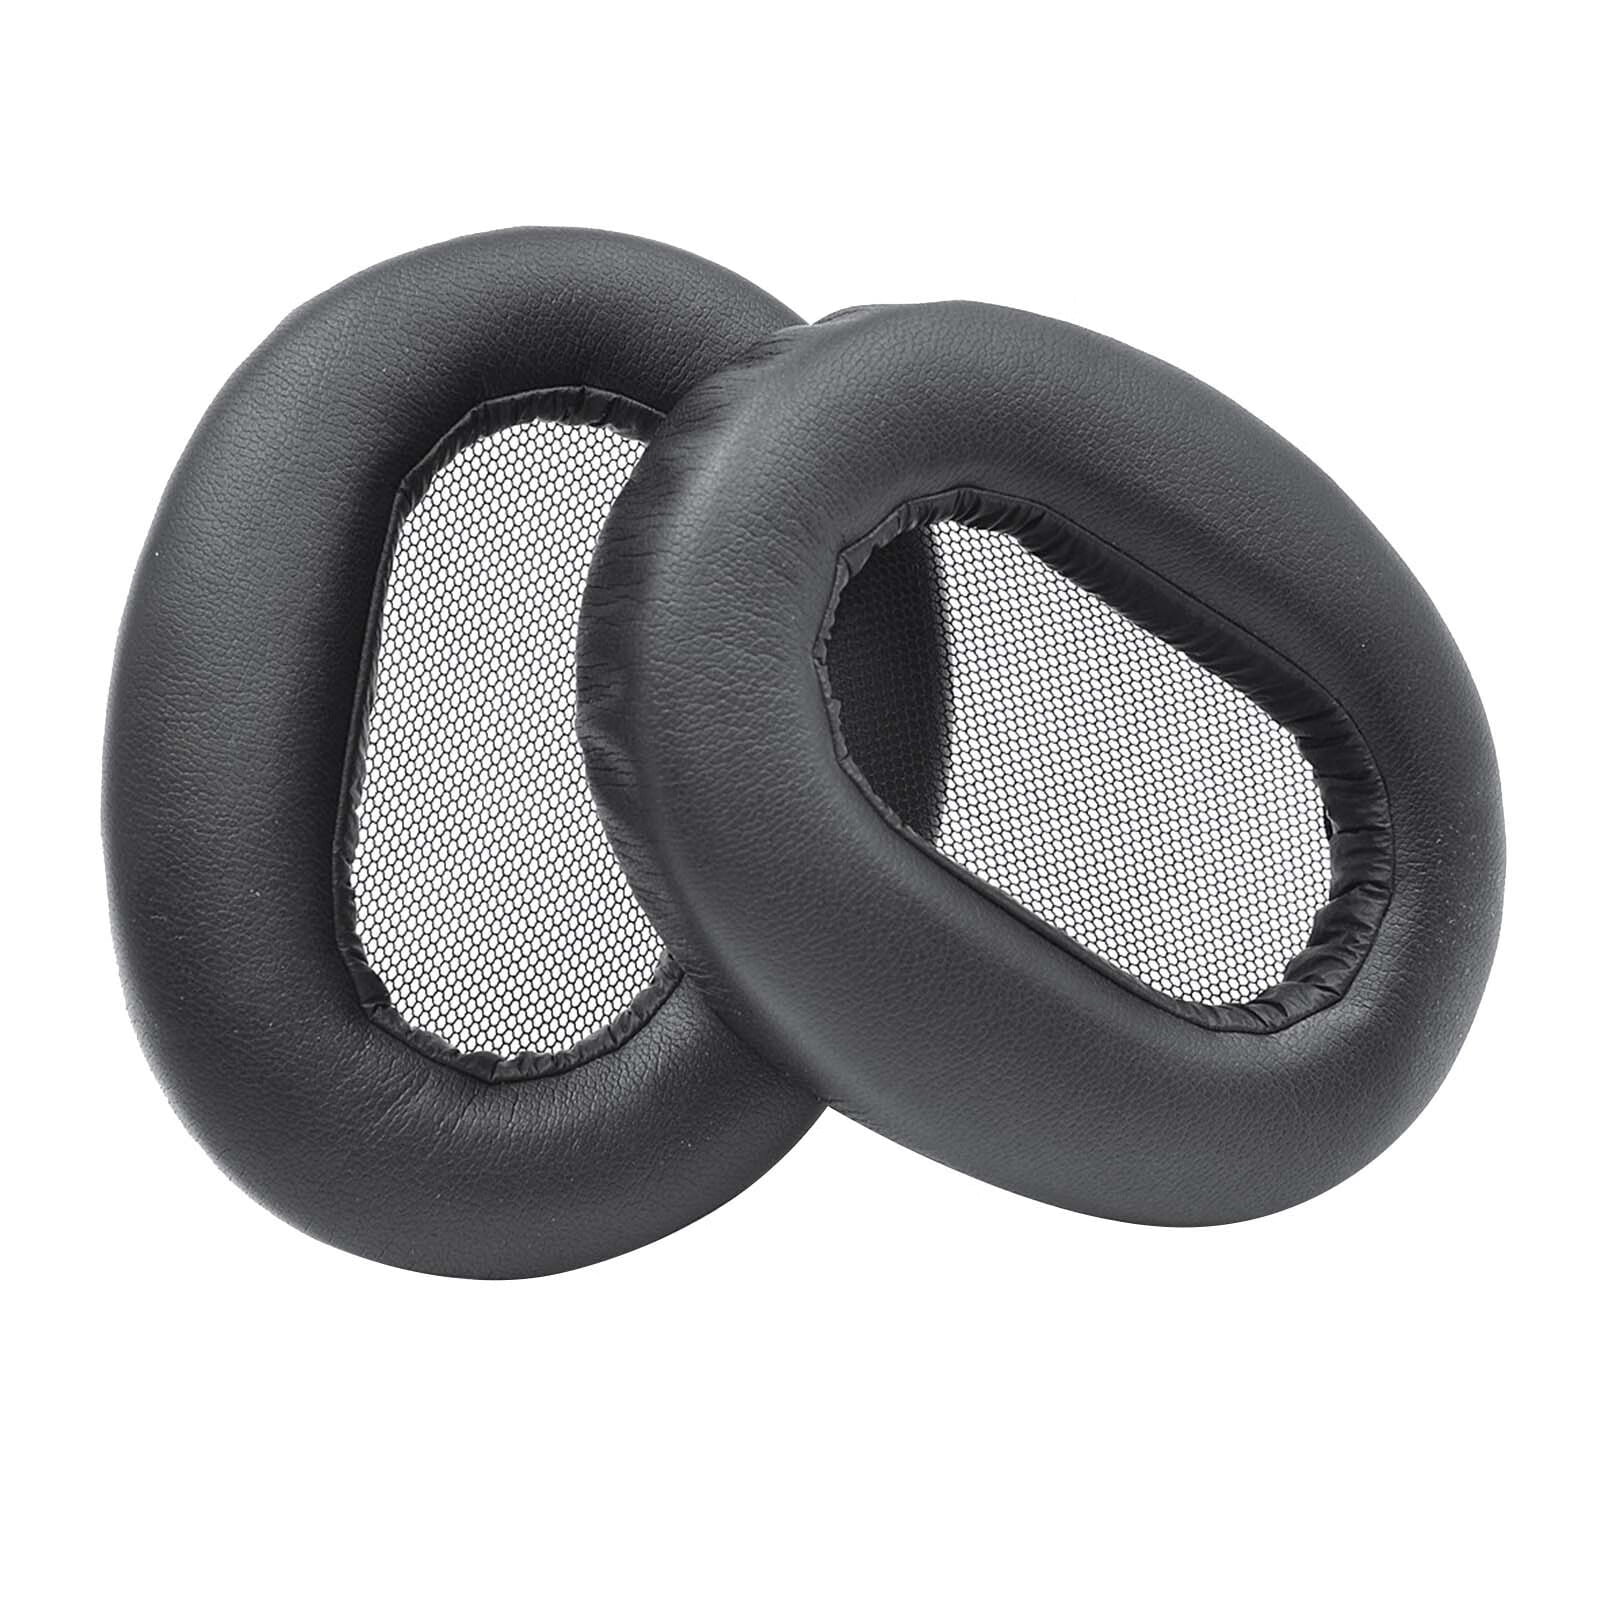 Jpgif Leather Headphone Earmuffs Compatible With compitable with 